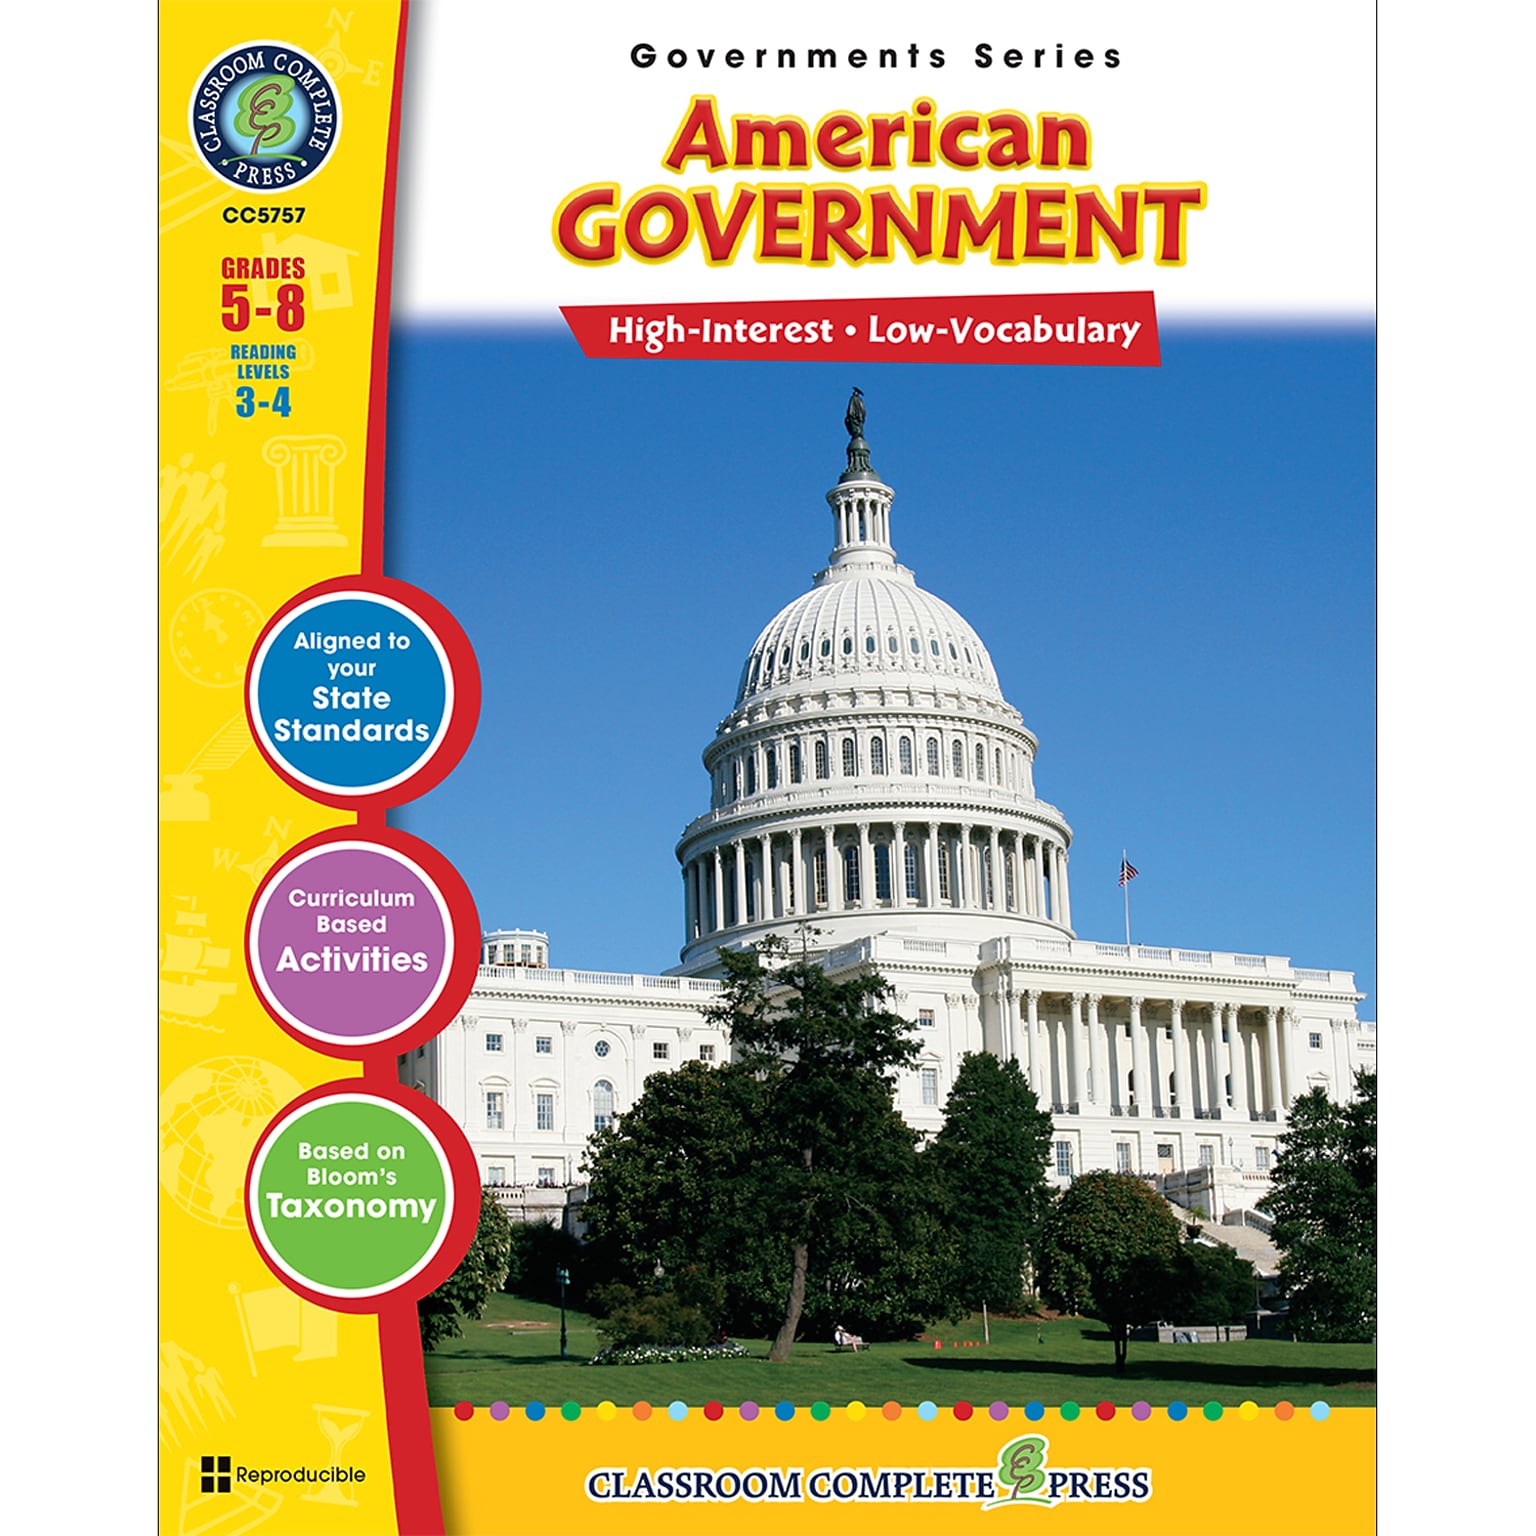 Governments Series: American Government